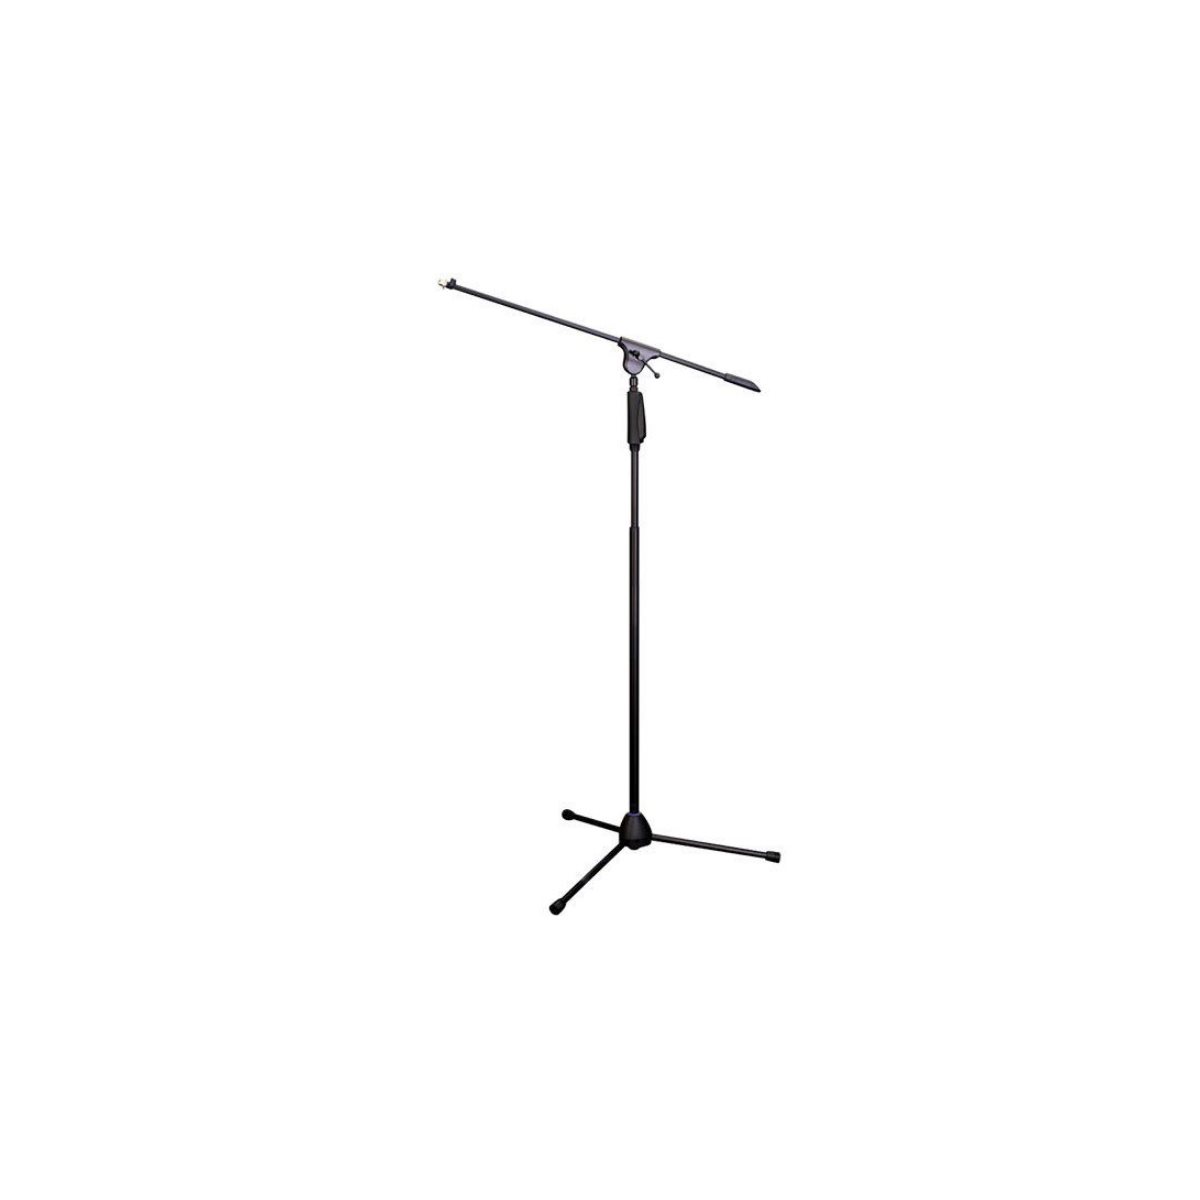 PROFILE - MS6618B - Microphone Stand With Quick Release